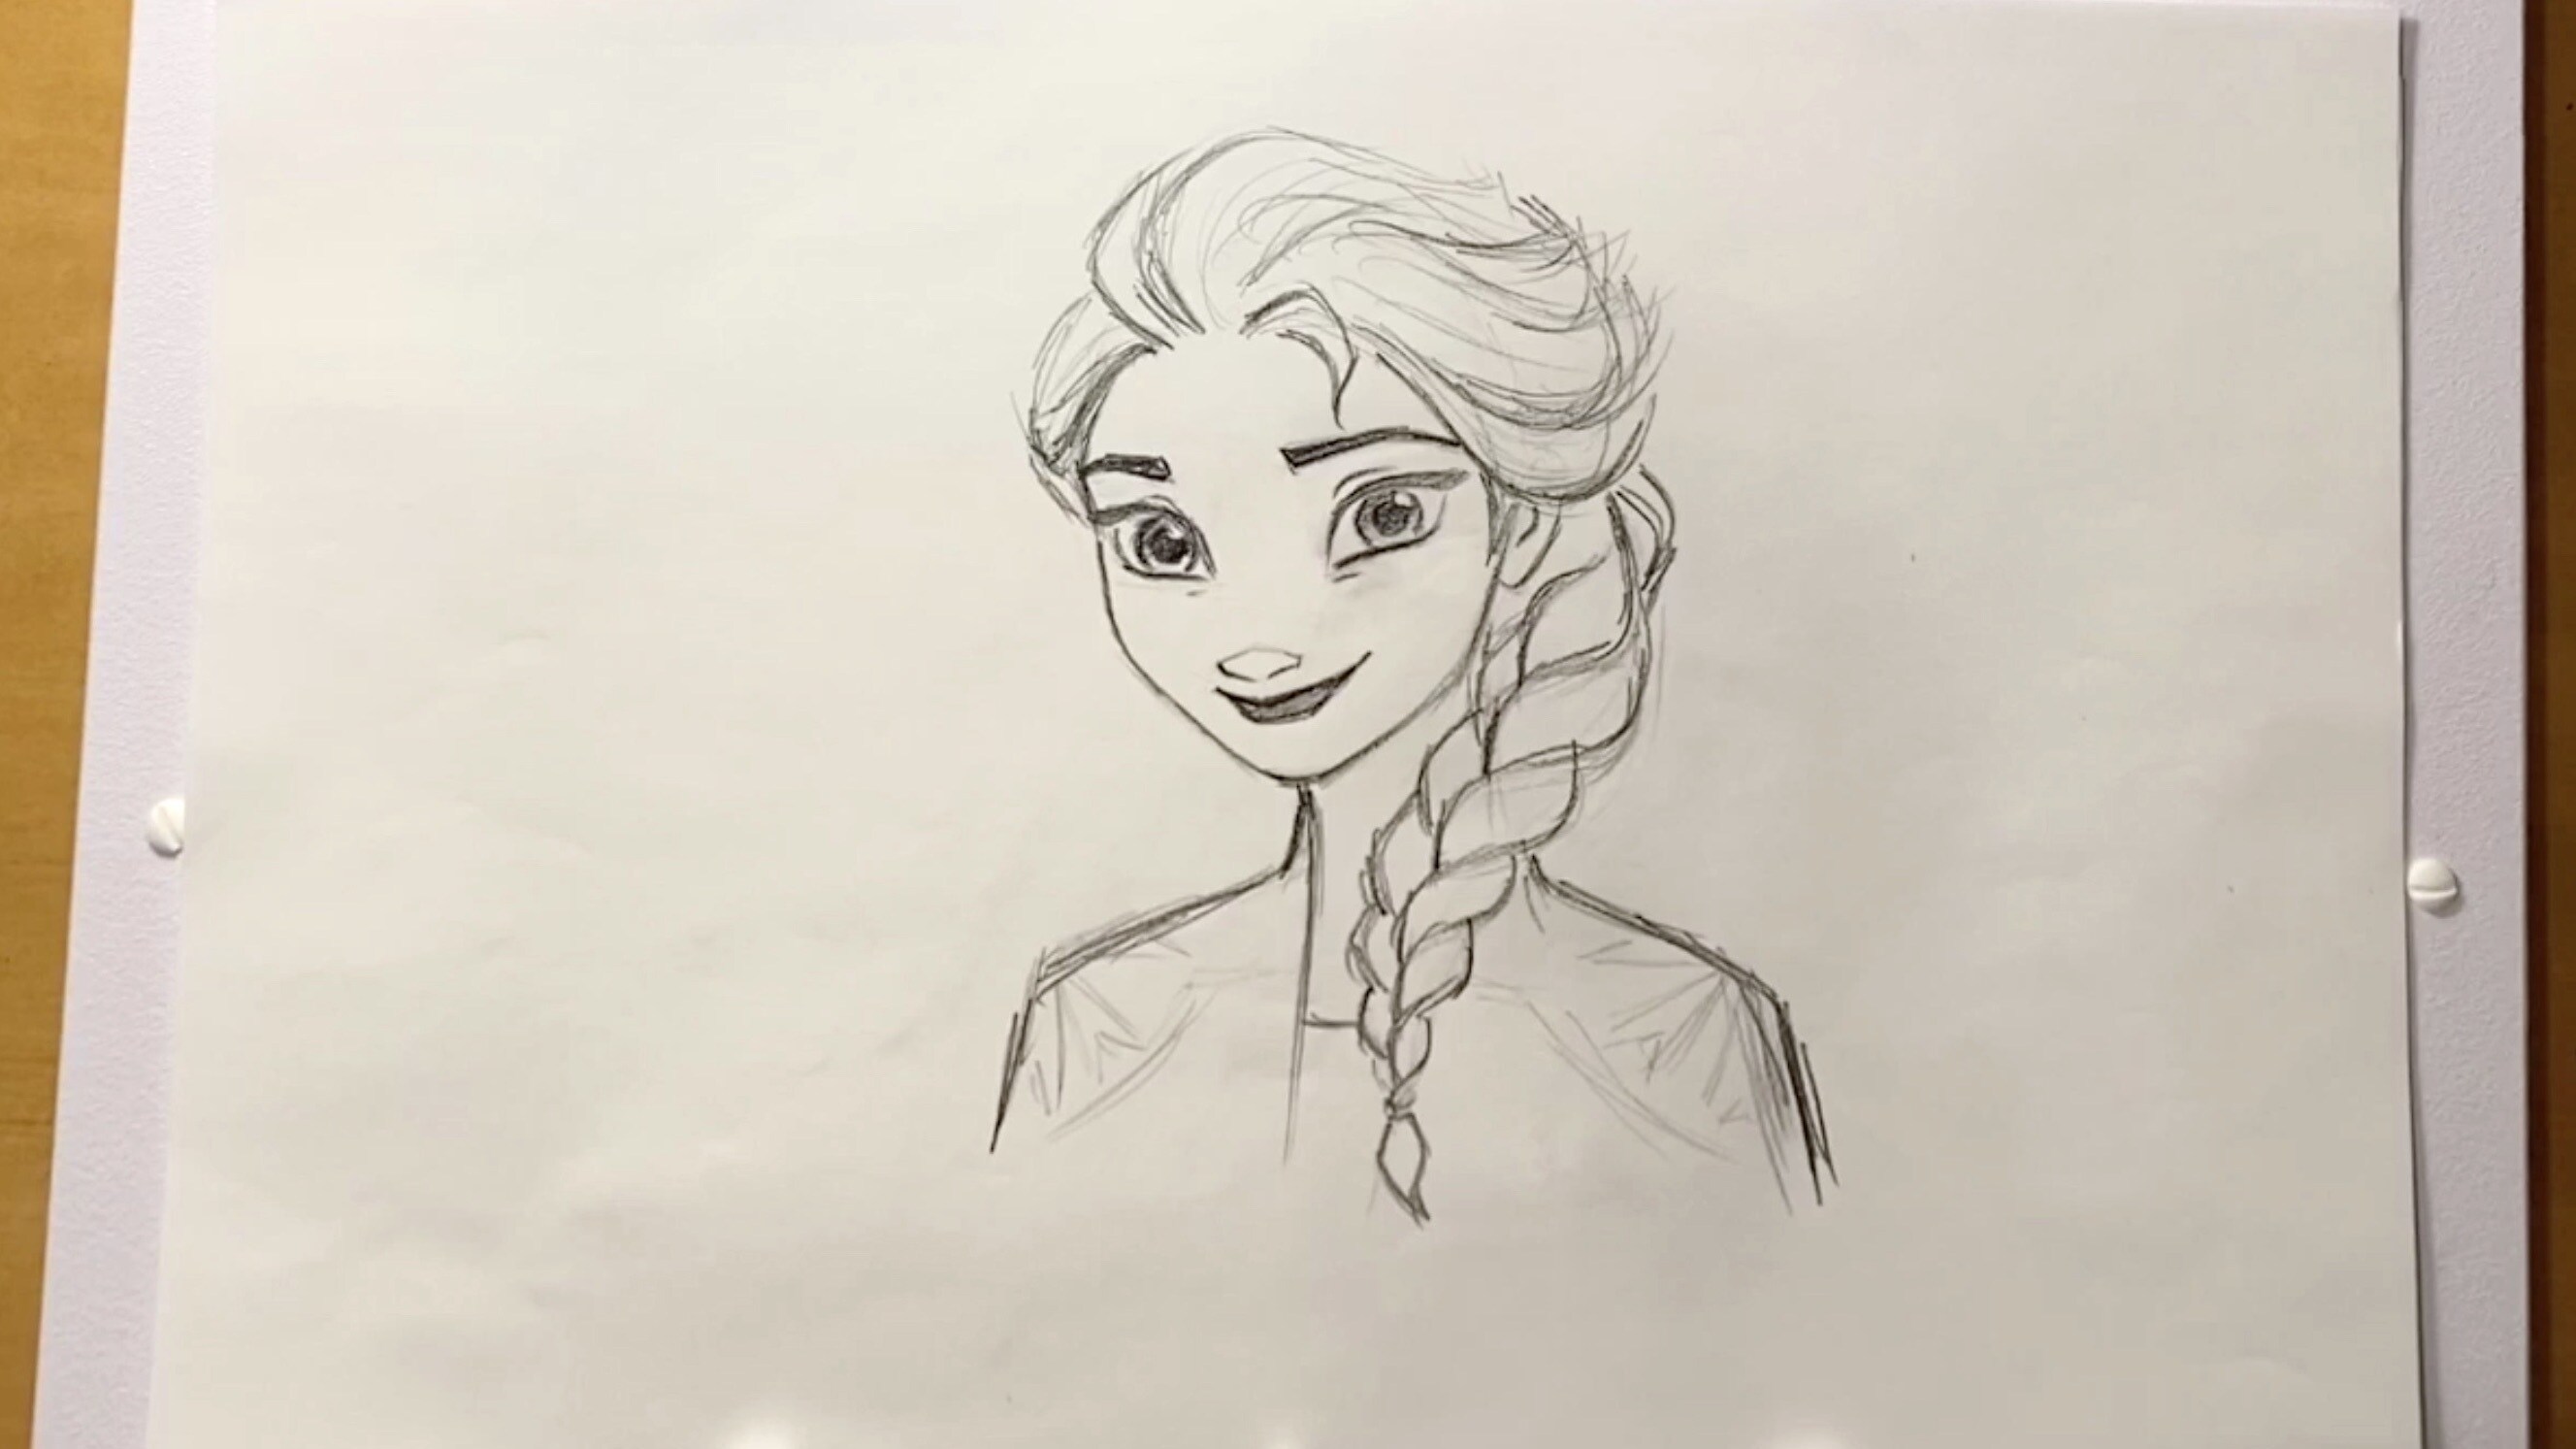 Coolest Drawing Lesson Ever: How to Draw Elsa From Frozen 2 | Disney News